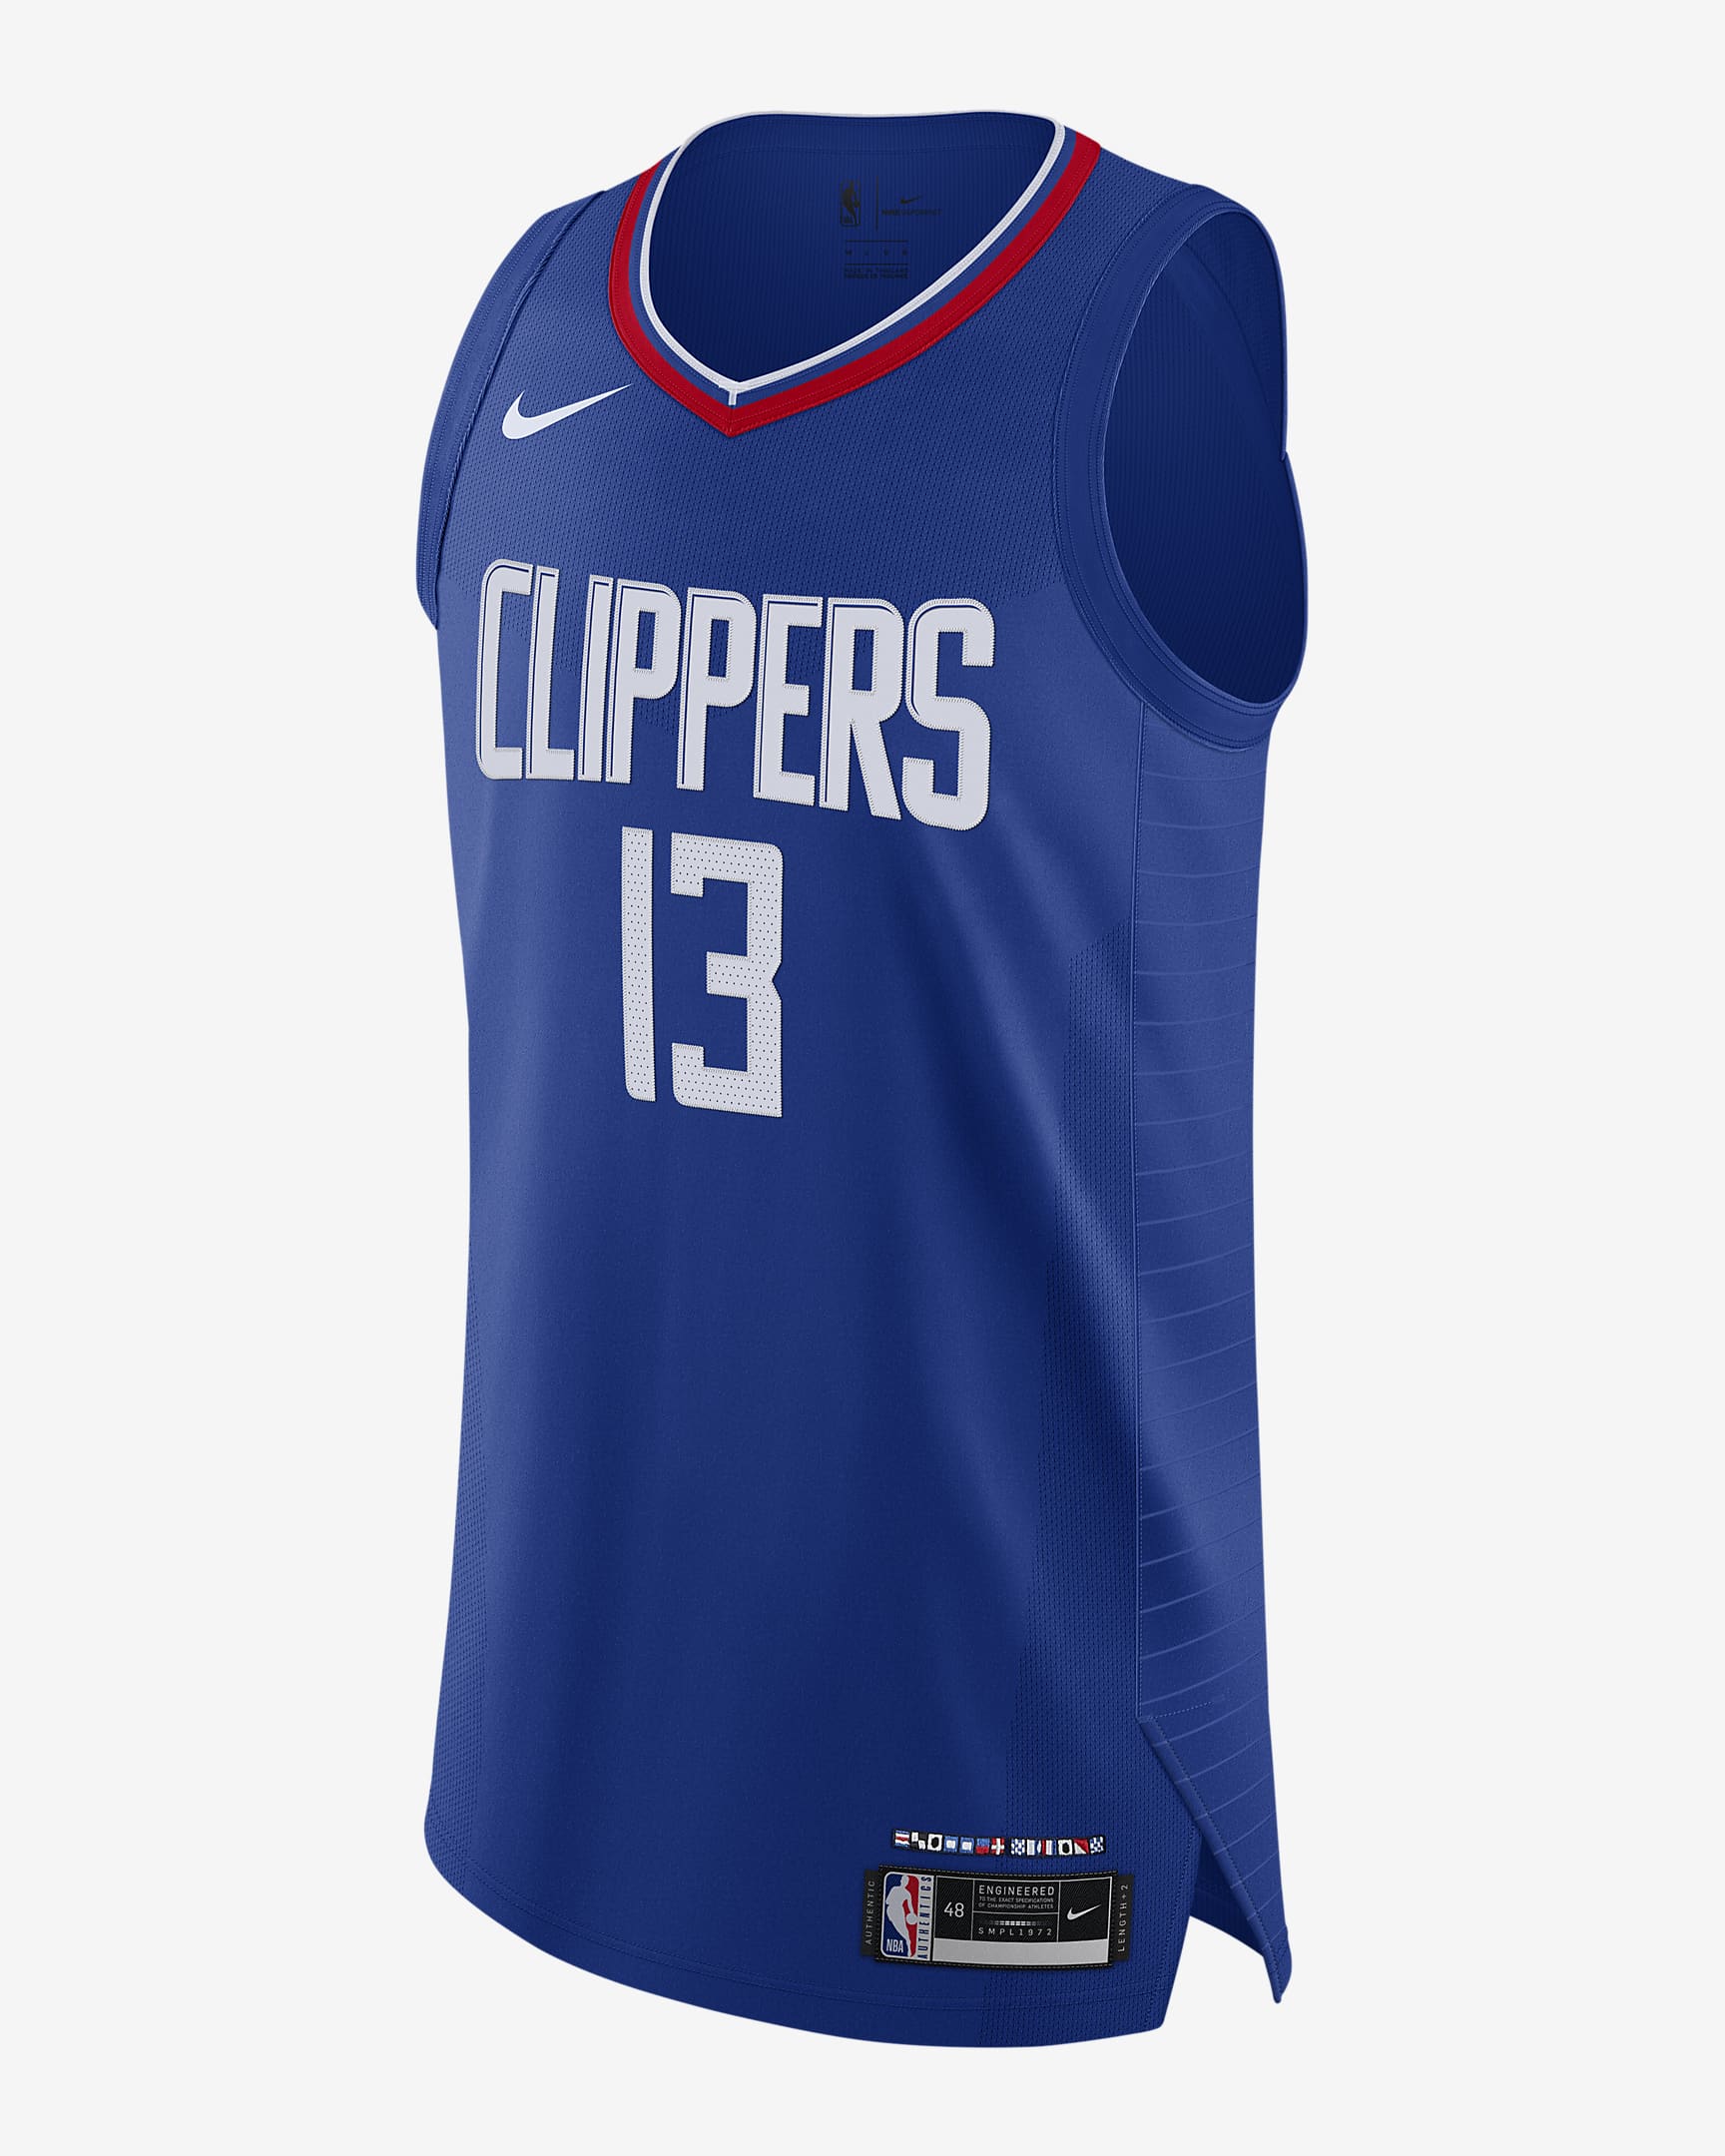 Camiseta Nike NBA Authentic Paul George Clippers Icon Edition 2020 ...